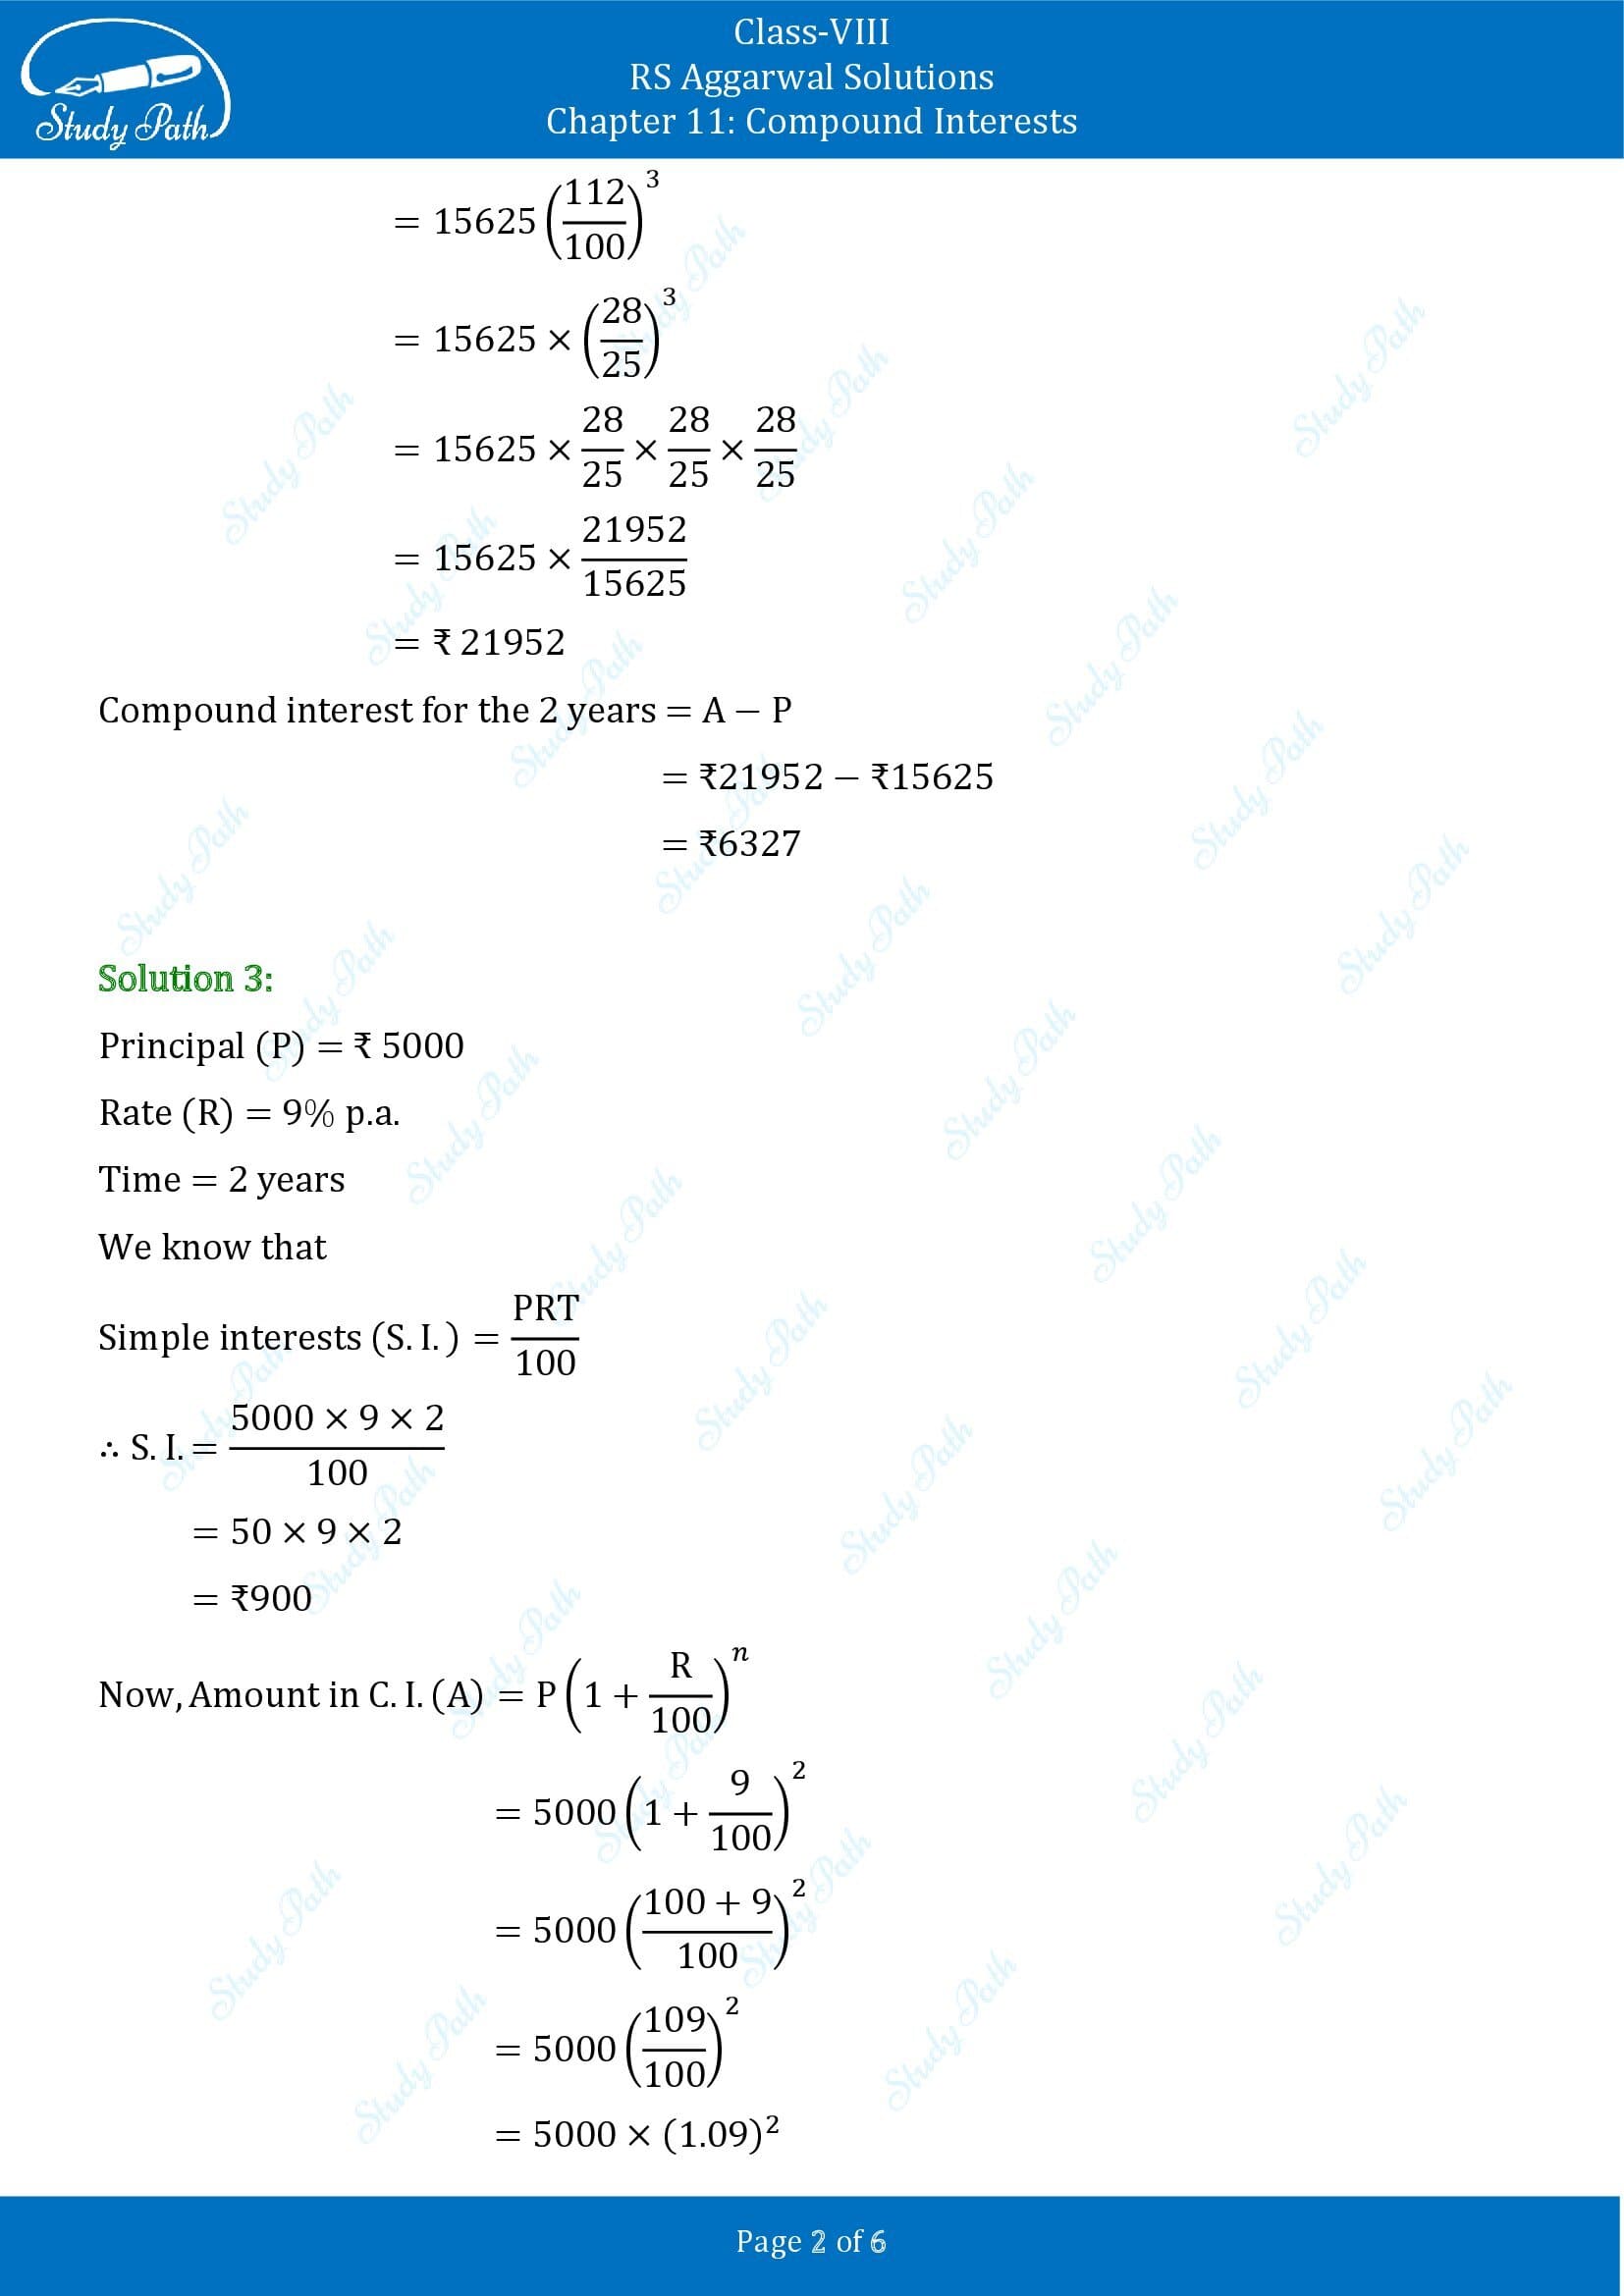 RS Aggarwal Solutions Class 8 Chapter 11 Compound Interests Exercise 11A 00002